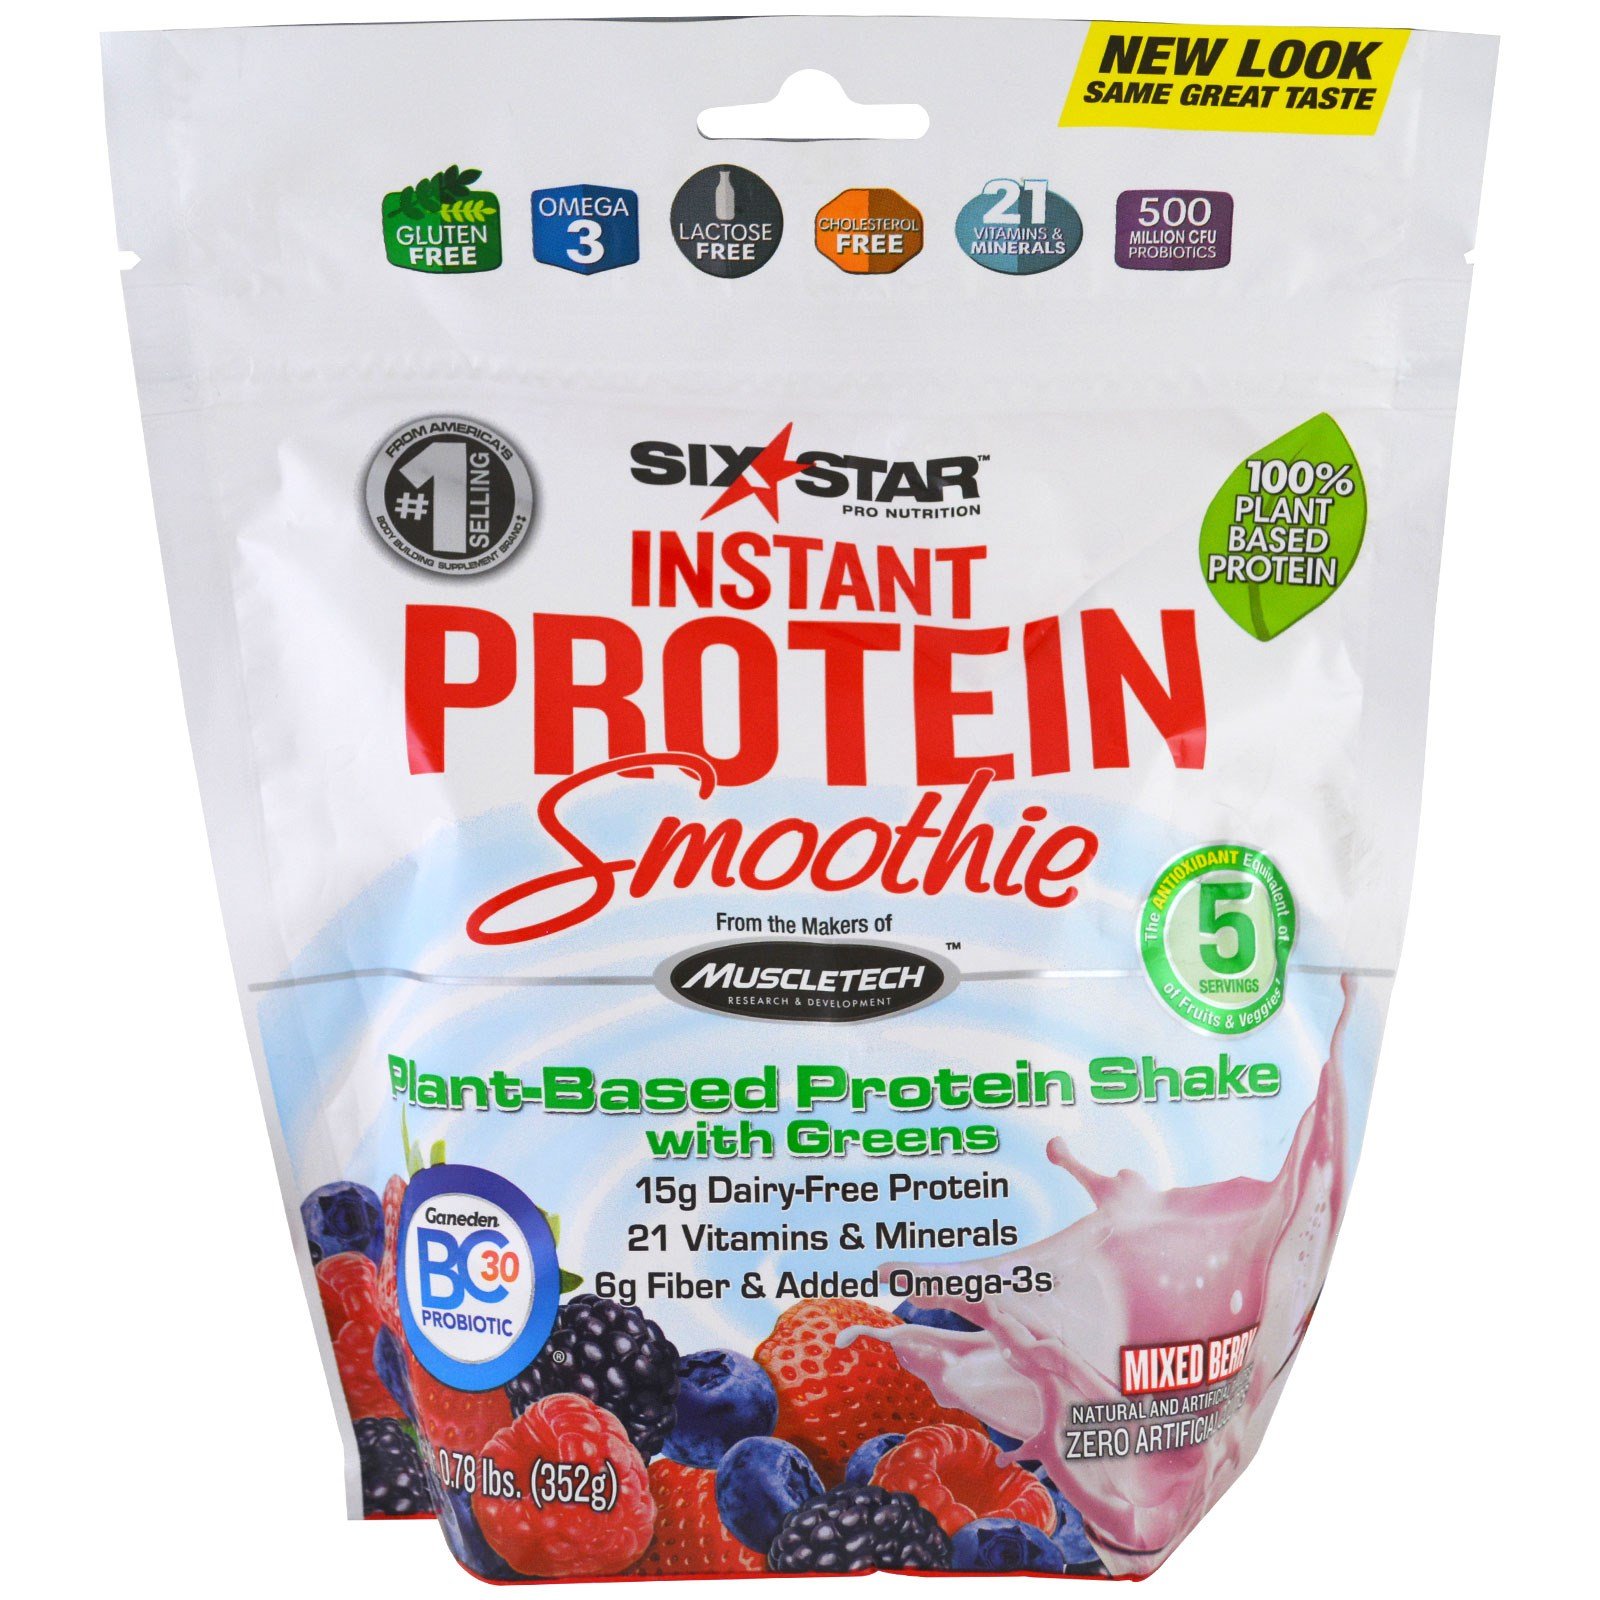 Six Star, Instant Protein Smoothie, Mixed Berry, 0.78 lbs (352 g)